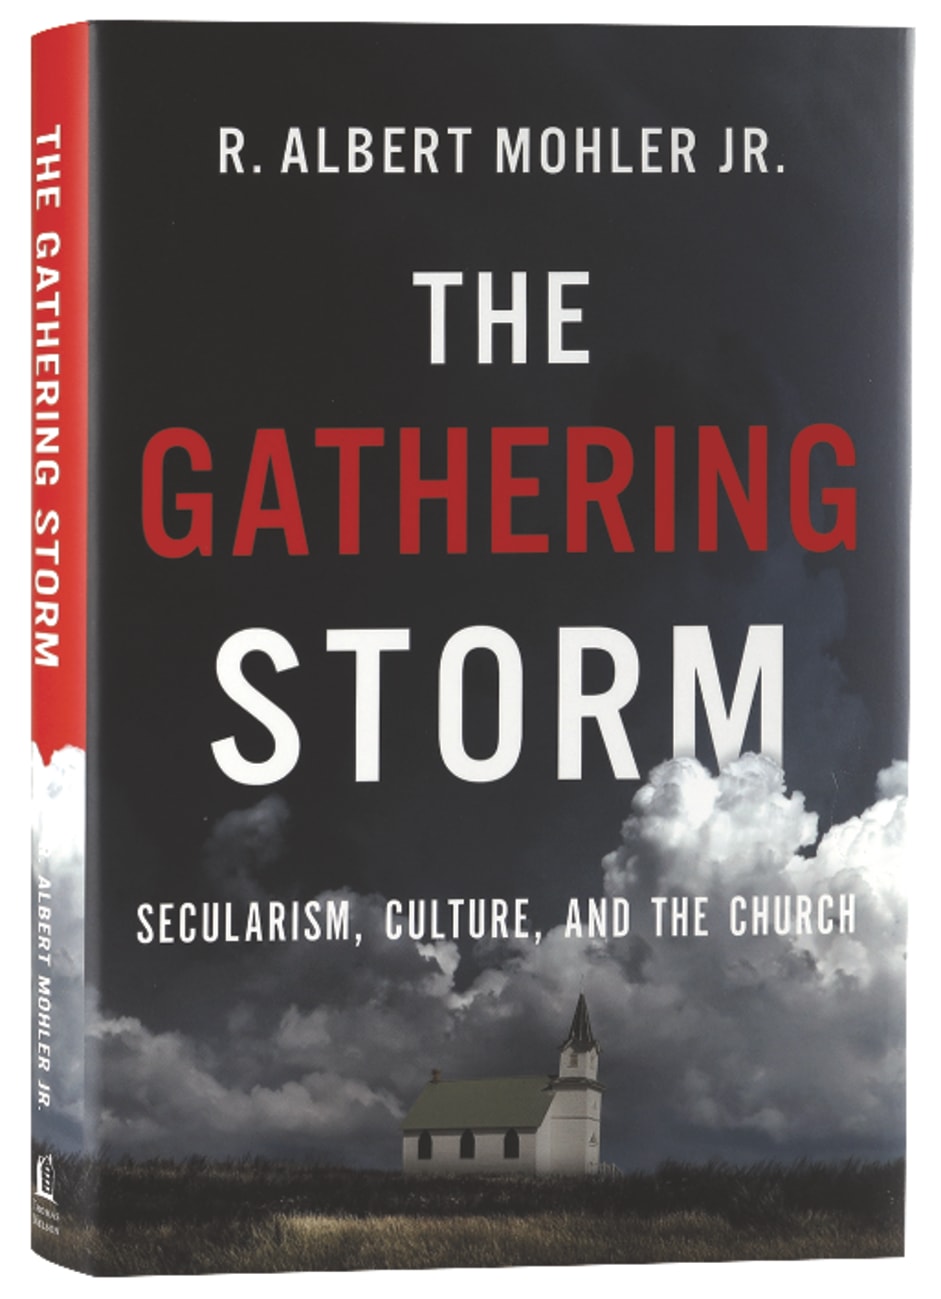 The Gathering Storm: Secularism, Culture, and the Church Hardback